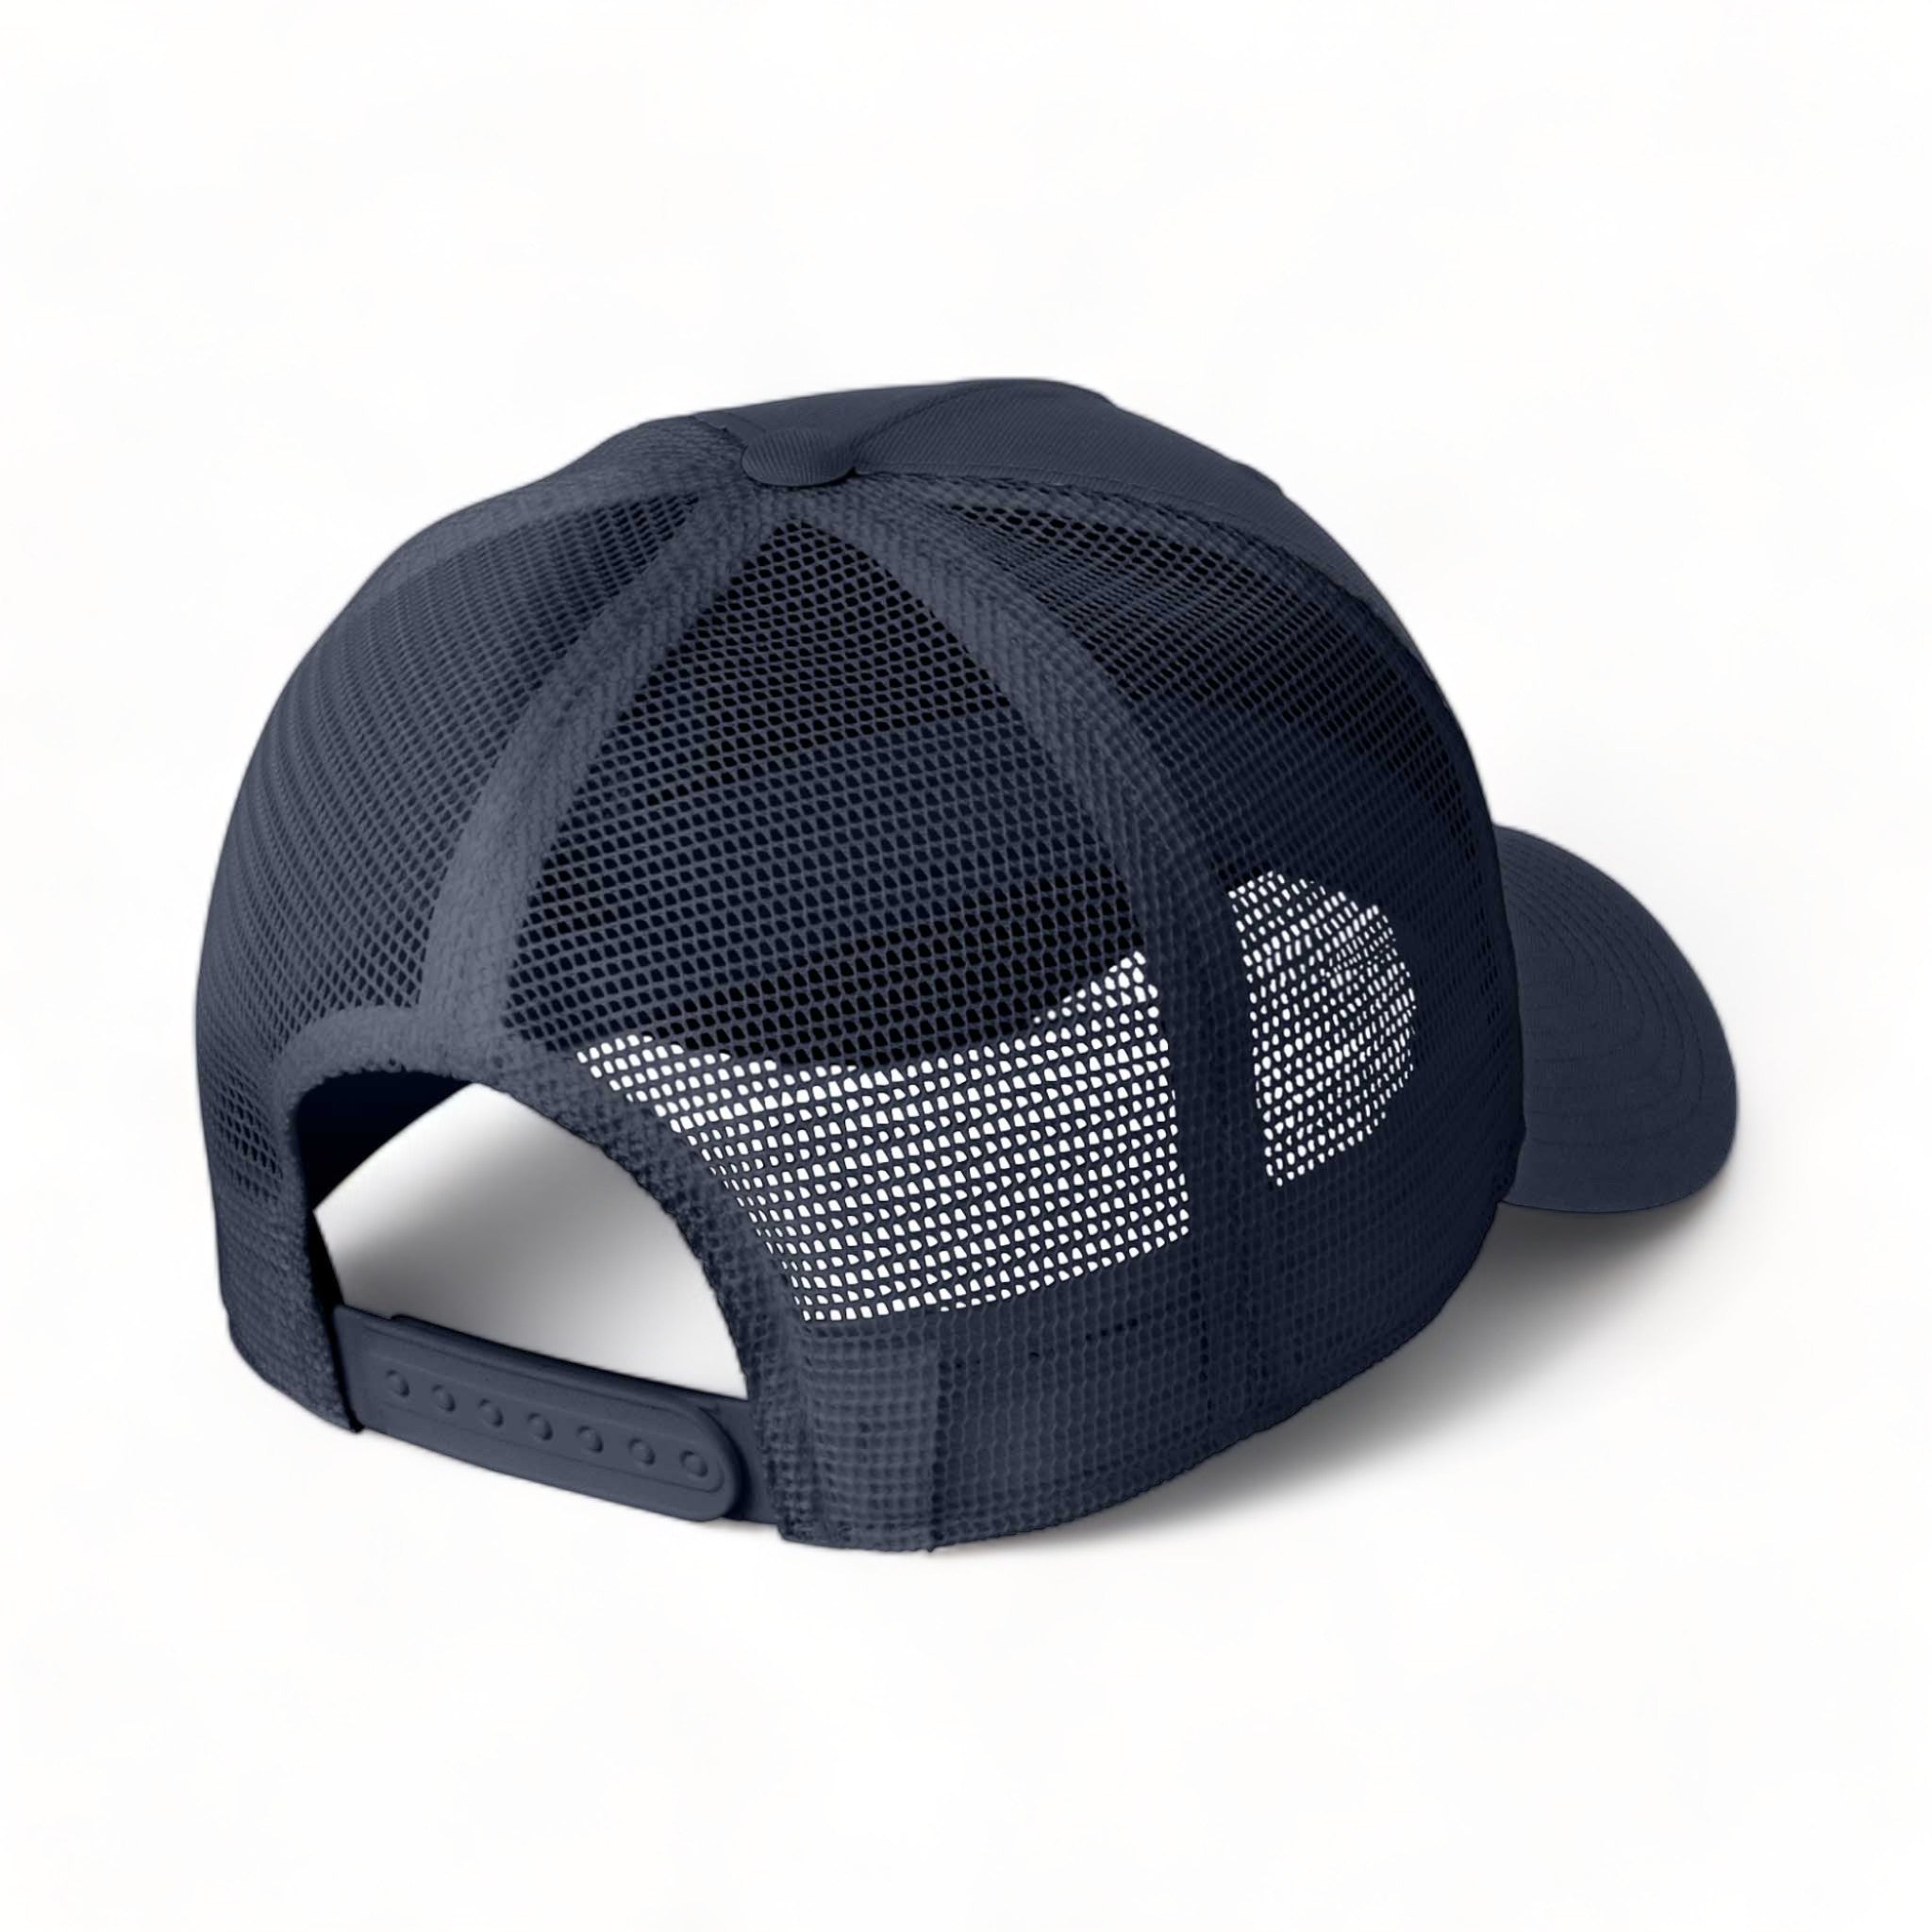 Back view of Nike NKFN9893 custom hat in navy and navy